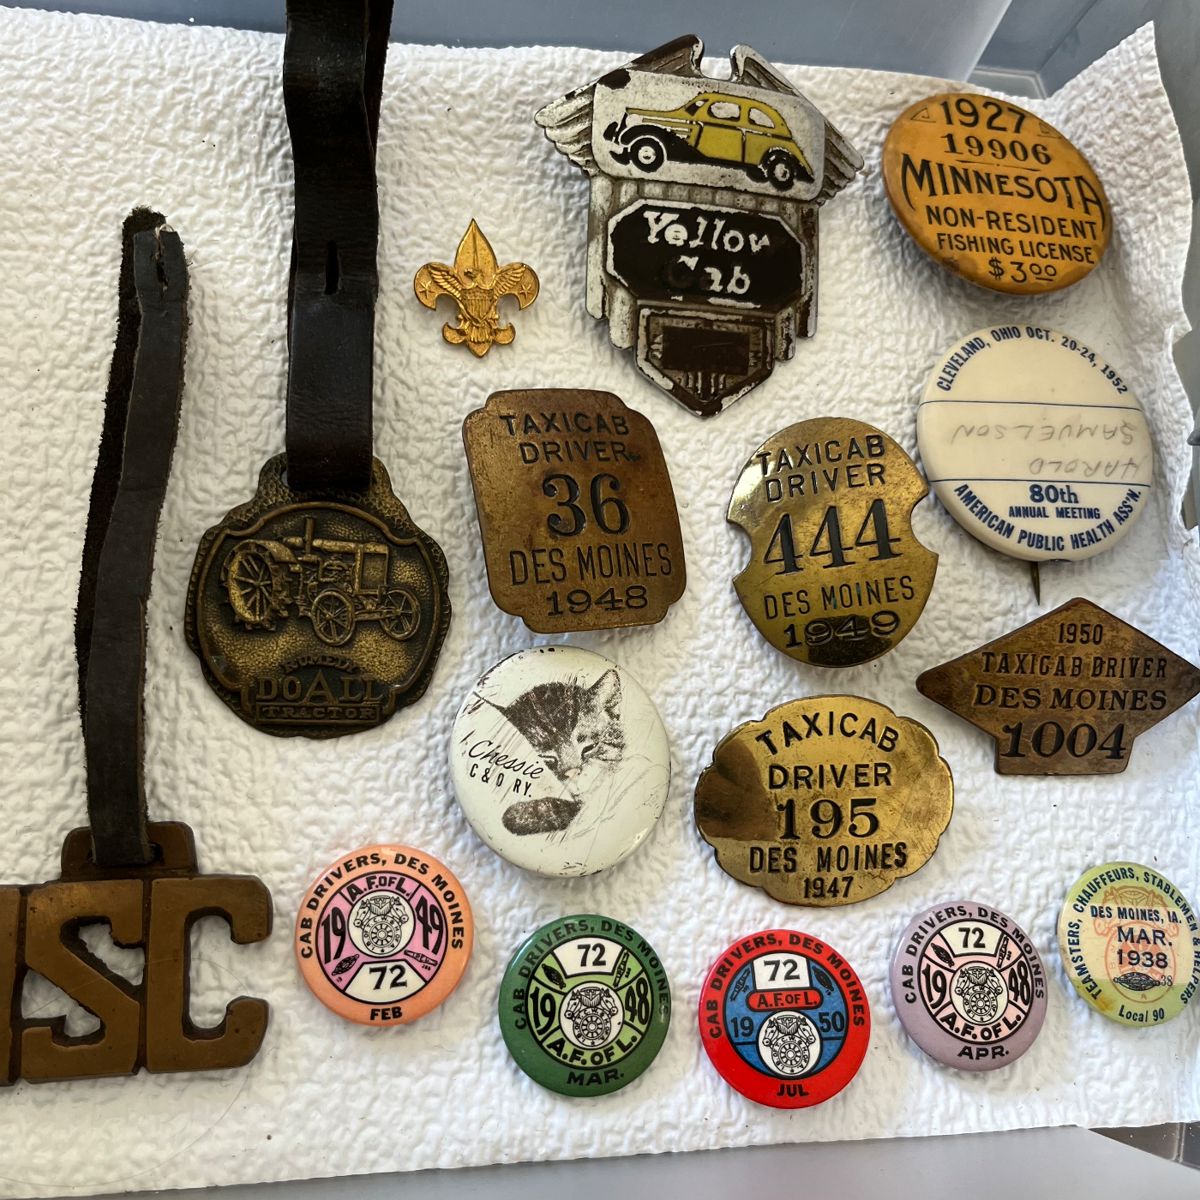 Vintage taxicab driver badges/pins (Des Moines, IA); vintage Yellow Cab badge/pin; pin for 1927 Minnesota non-resident fishing license.